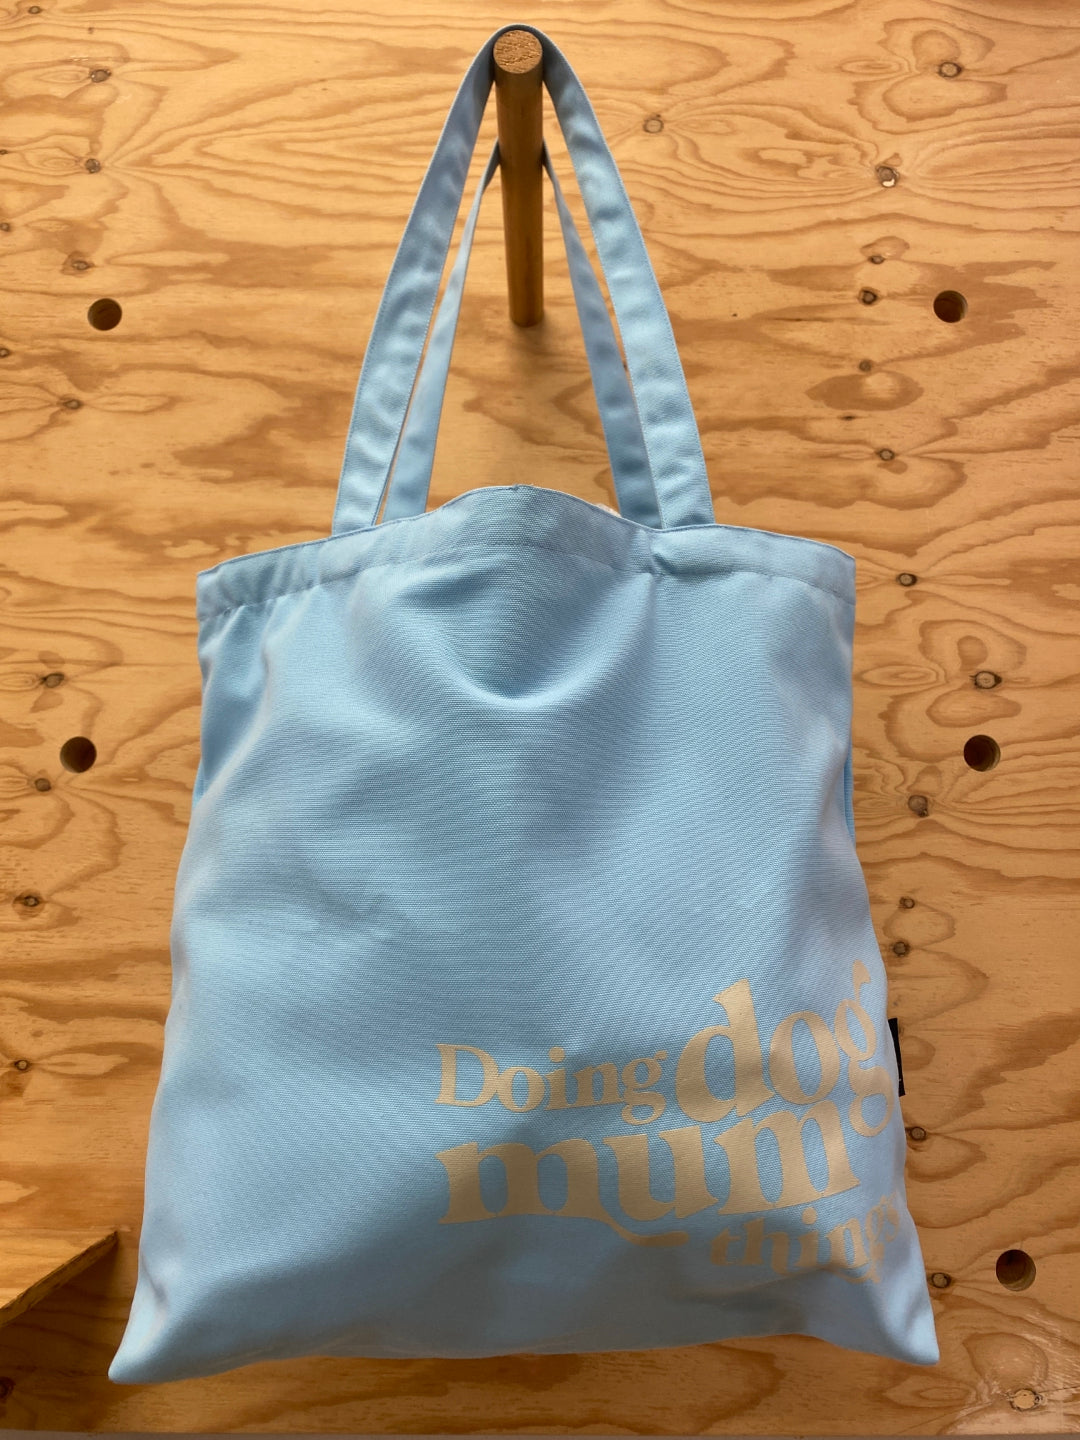 Doing Dog Mum Things Tote Bag from Paws for Change